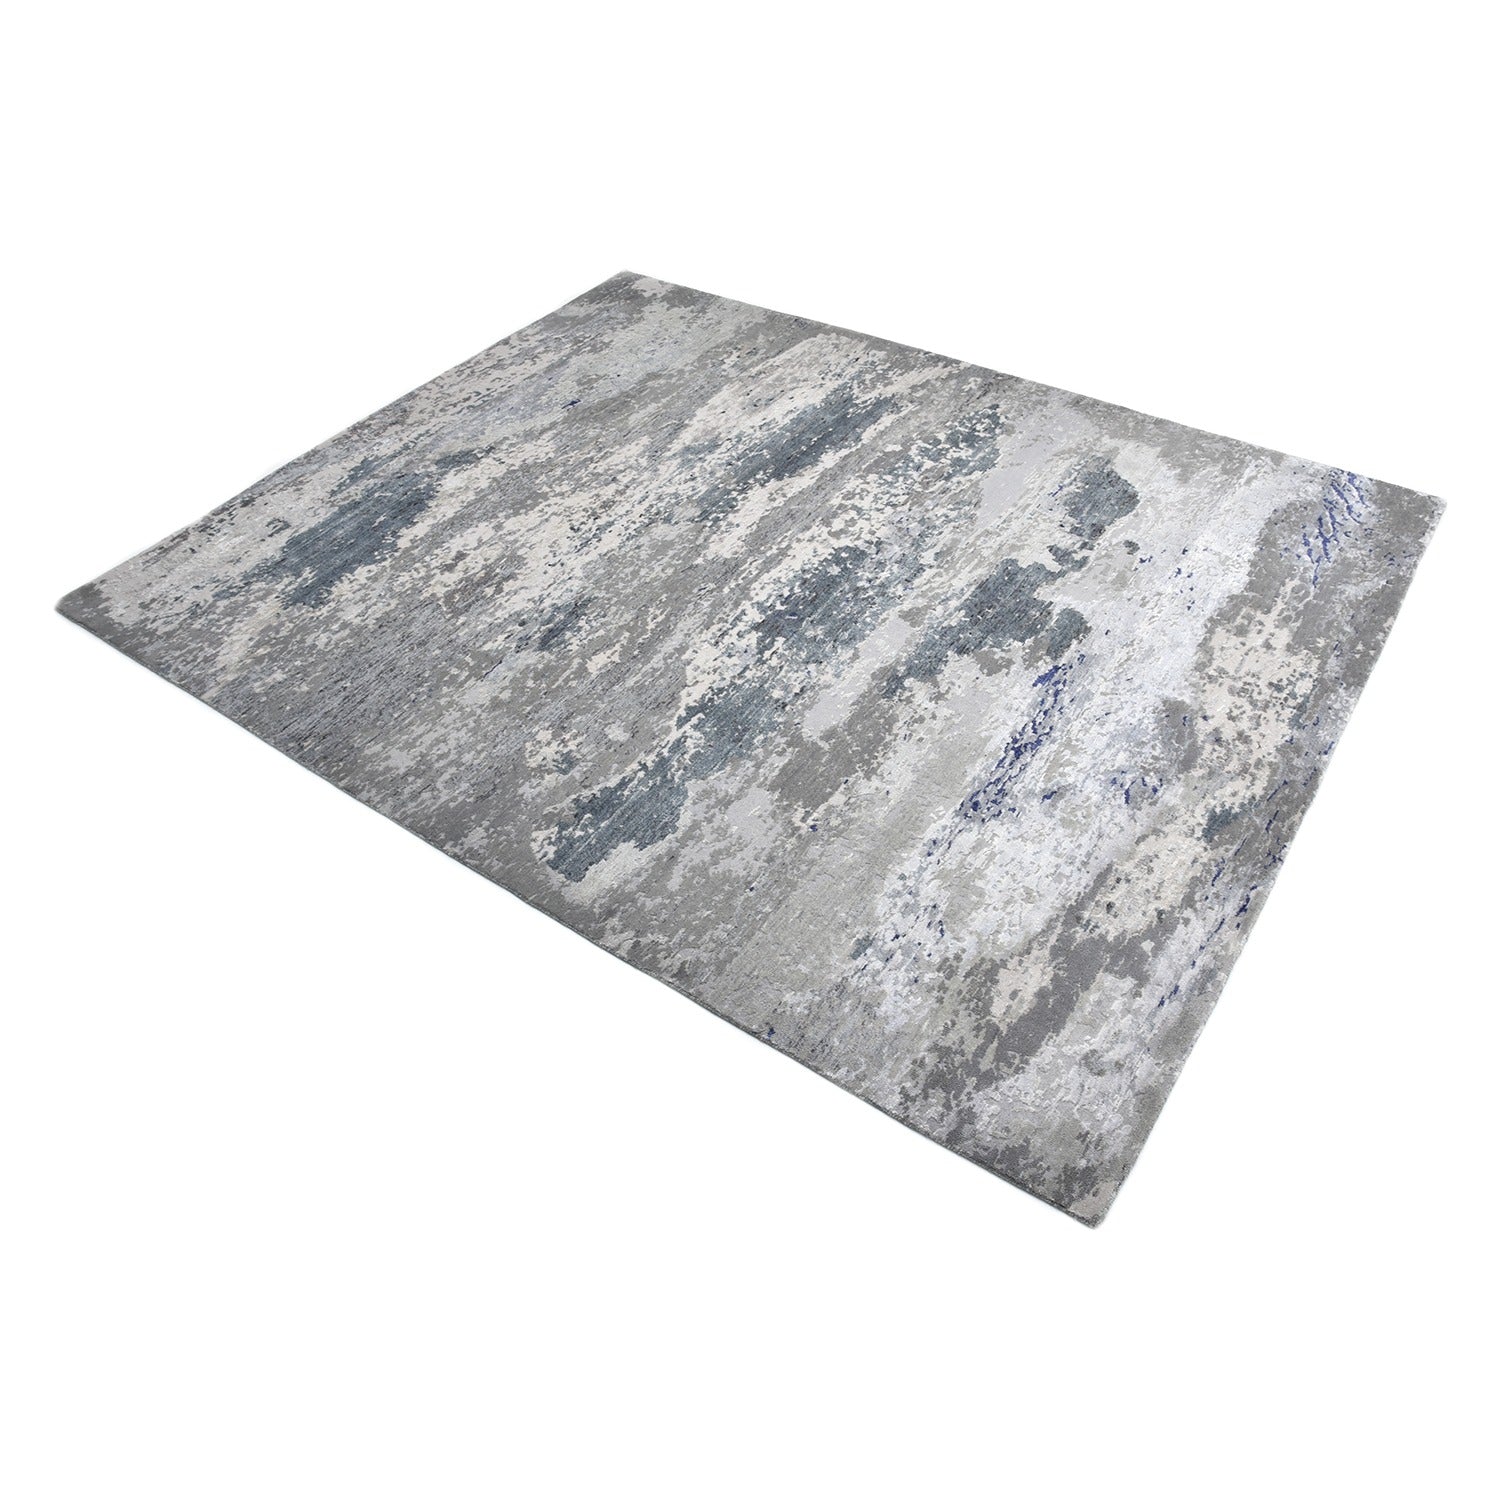 Distressed rectangular rug with muted gray and white pattern design.